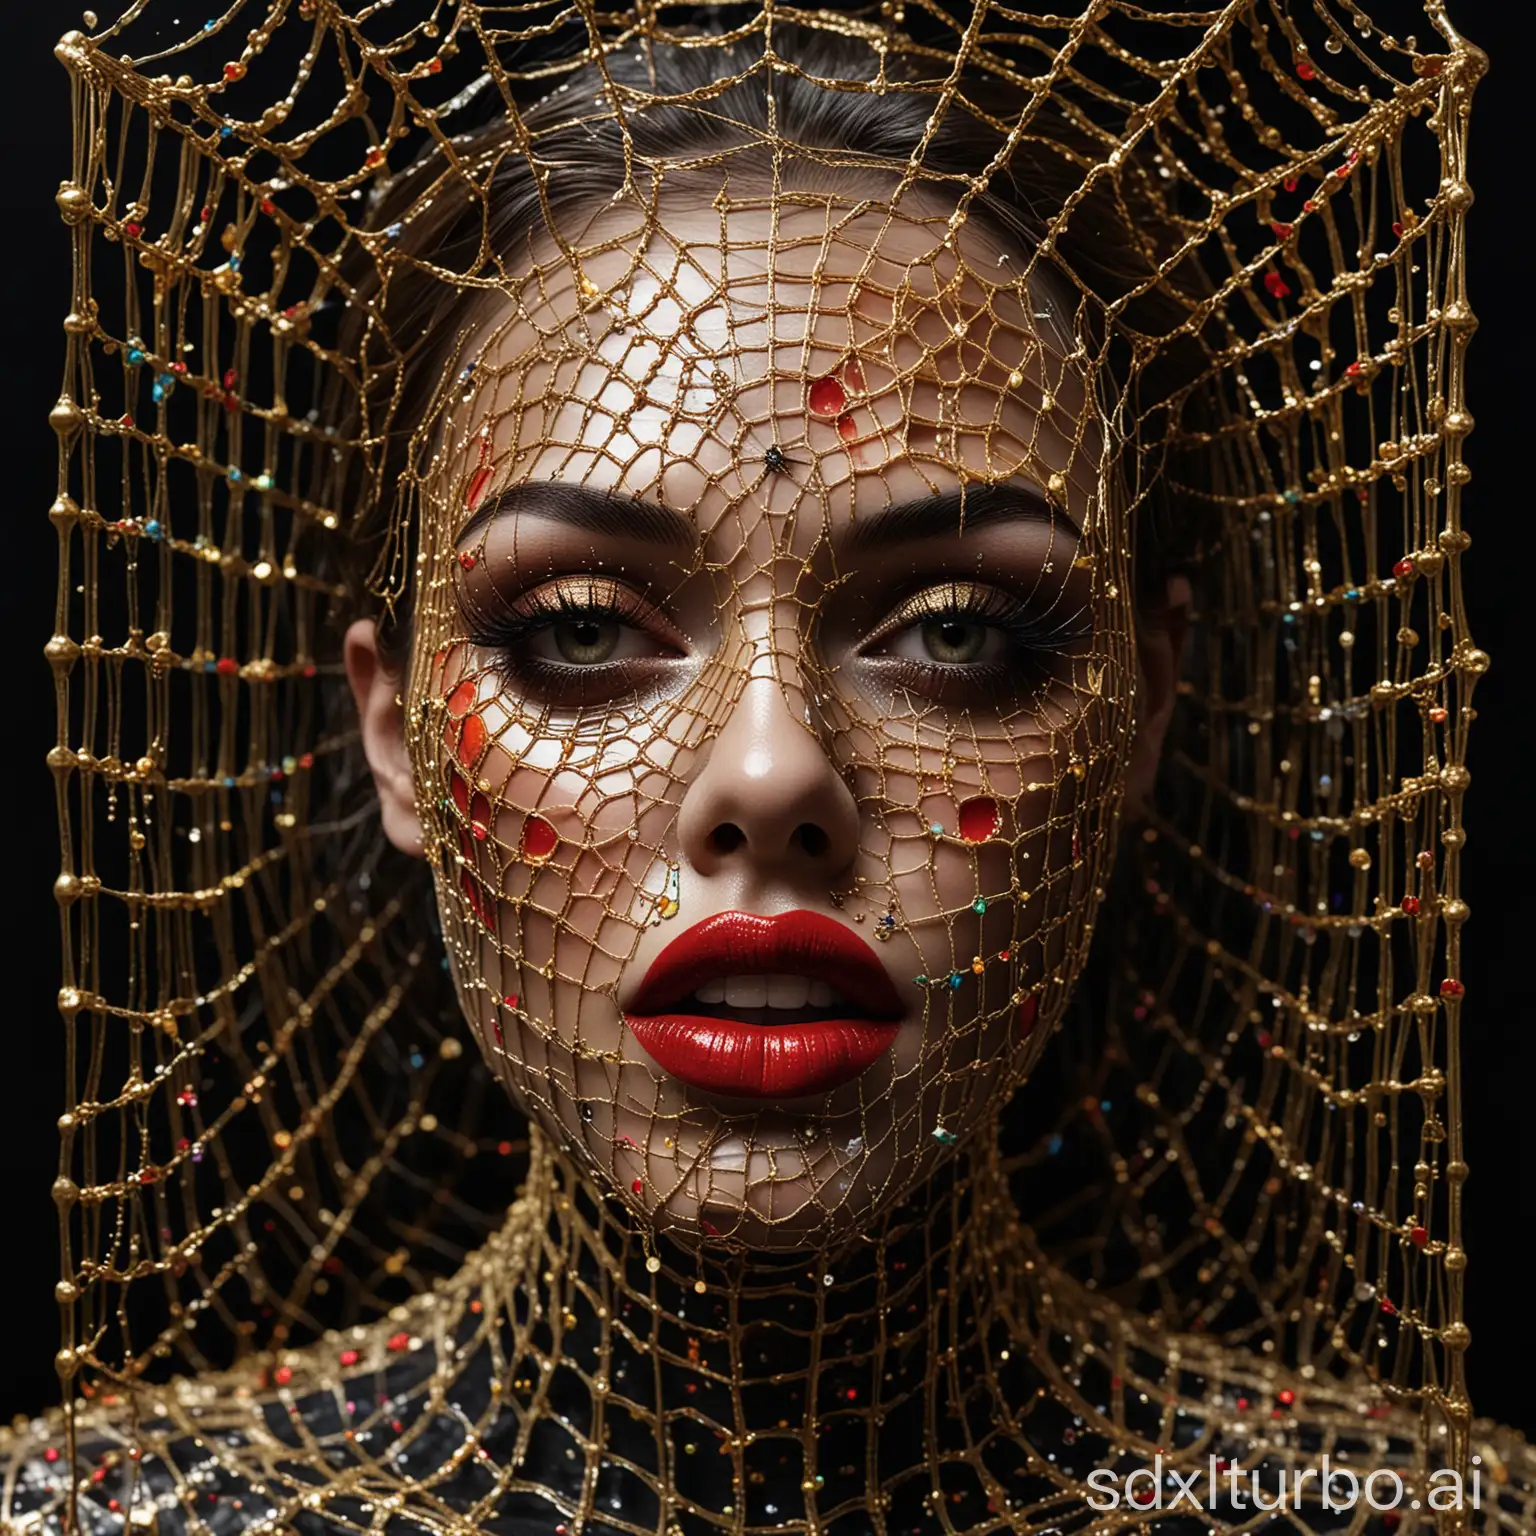 Create an image featuring a three-dimensional, rainbow colour, glossy humanoid face with spider net an open mouth lips with red lipstick and visible teeth, set against a black background. The face is framed by a complex, honeycomb-like structure with batik fractal liquid splashing golden nodes at the intersections. The overall aesthetic is futuristic and surreal. background dark batik fractal design